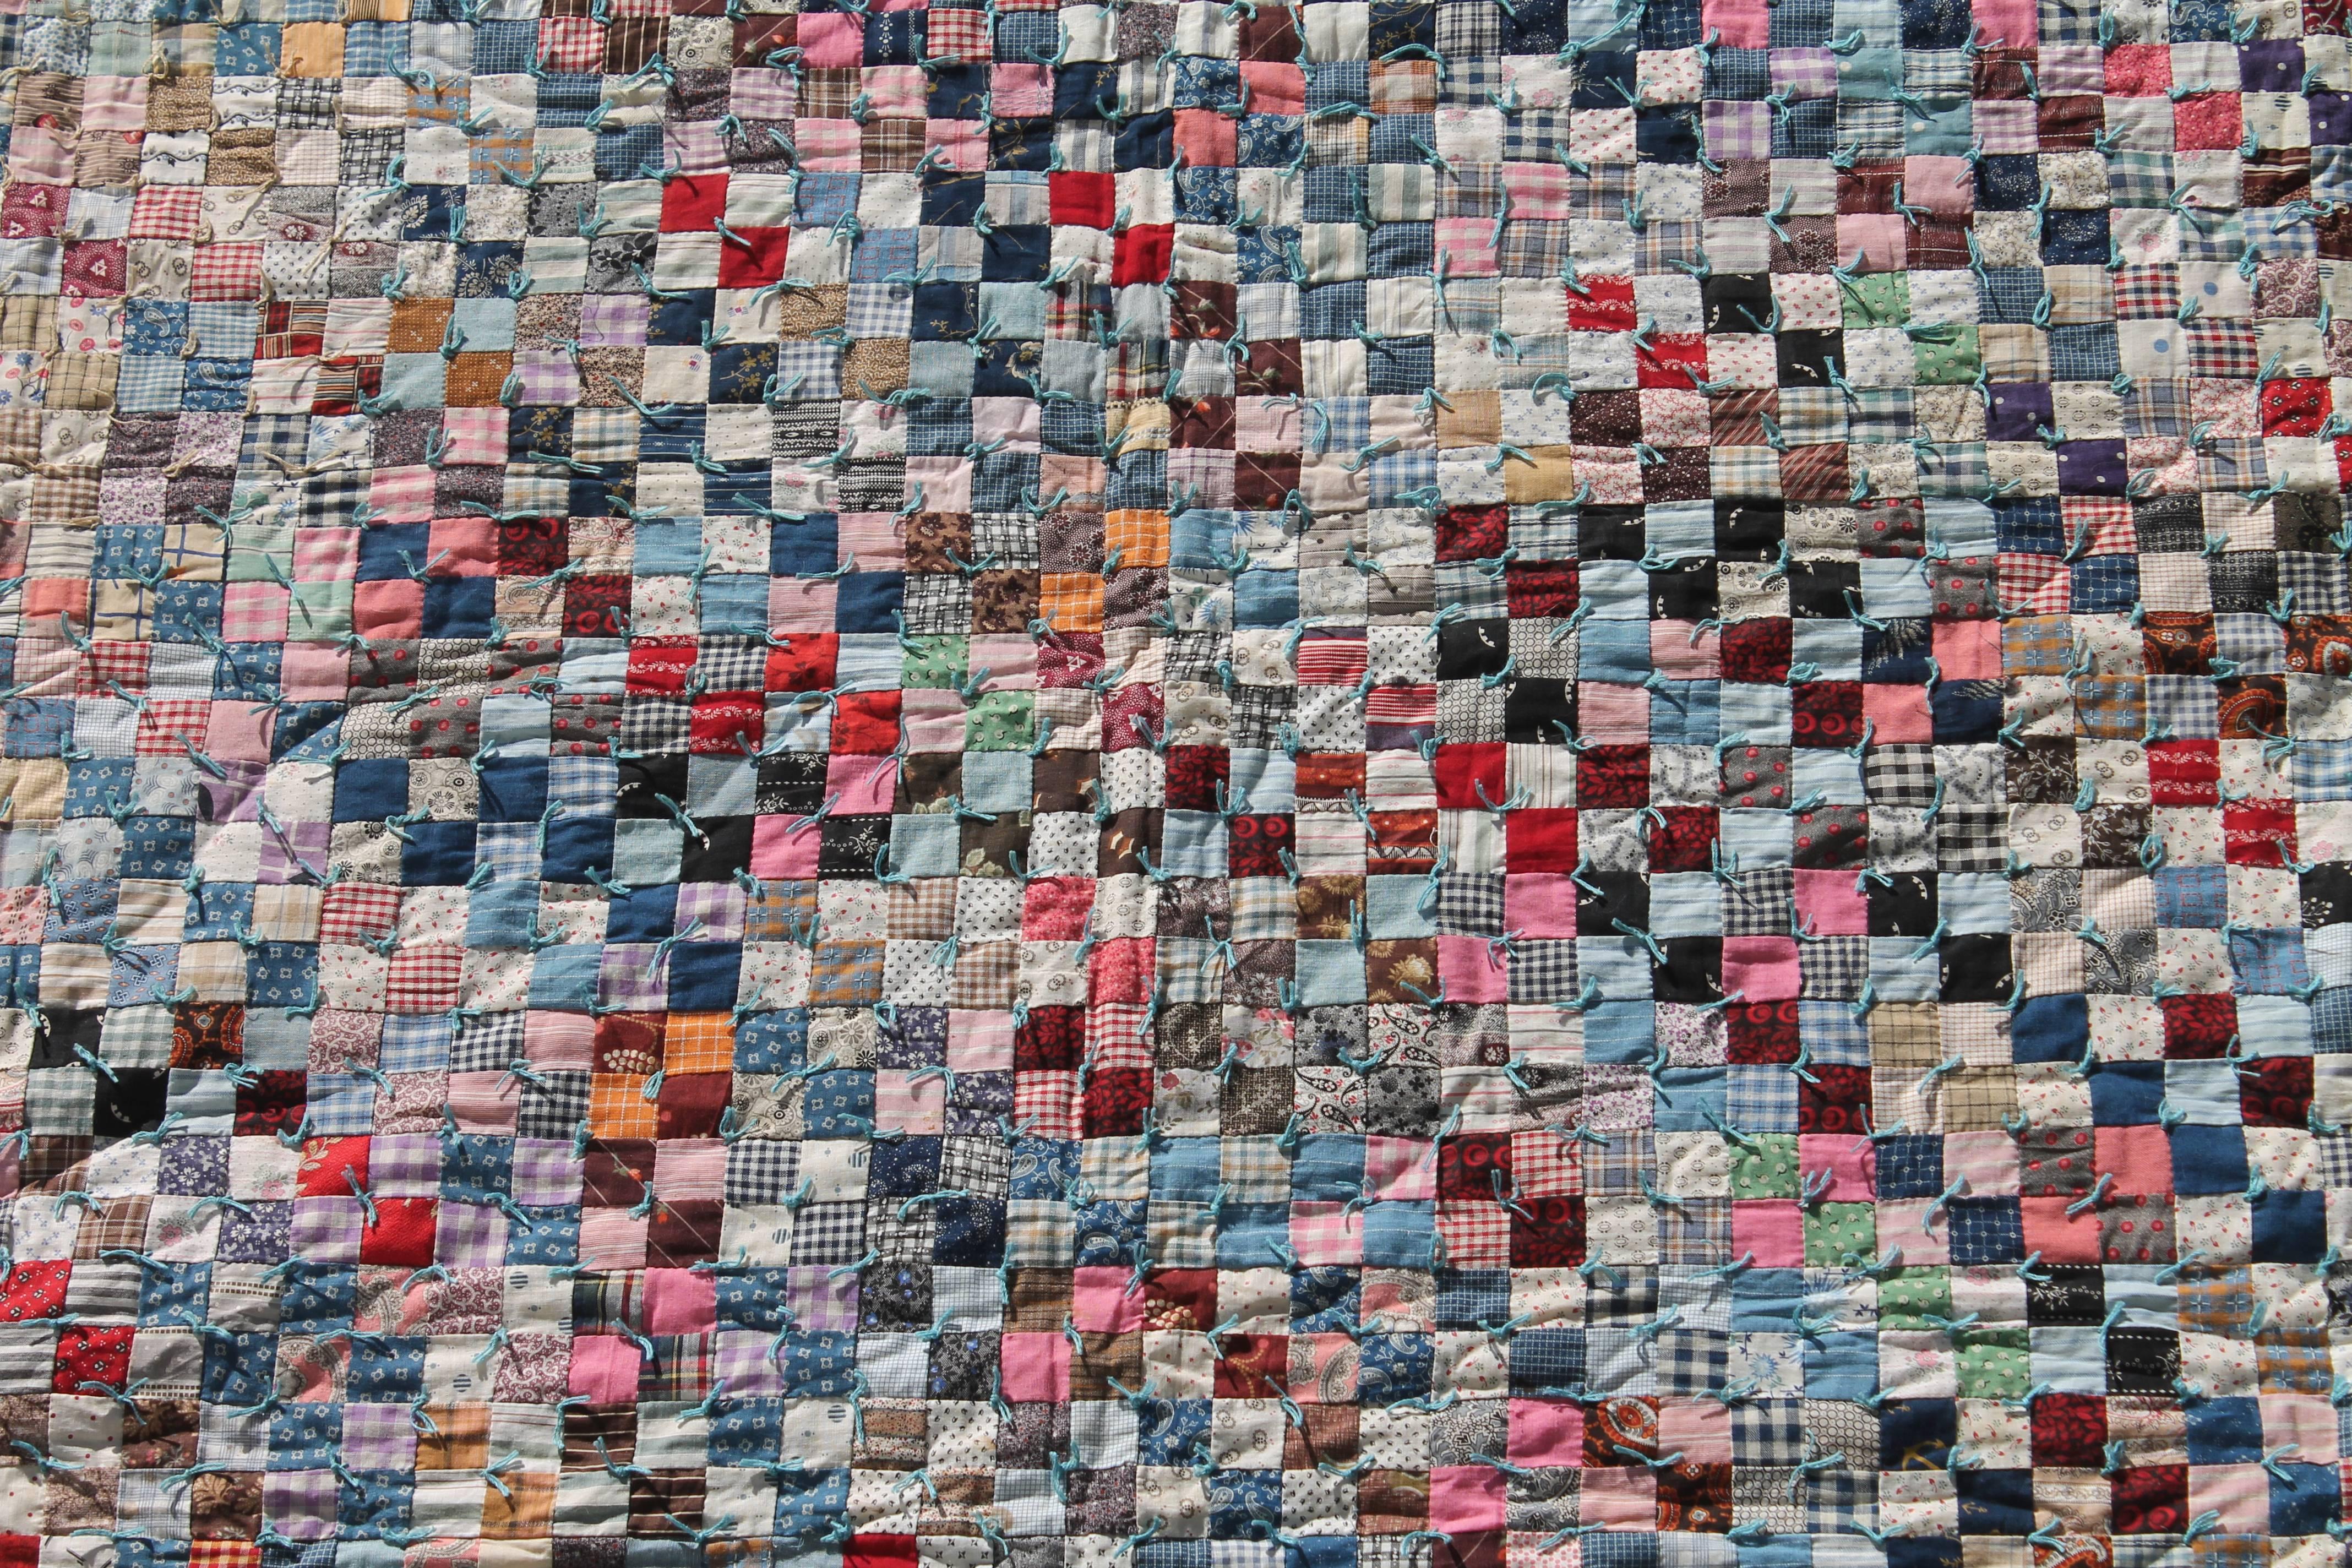 This finely pieced postage stamp quilt is in mint condition and vibrantly executed. This large size quilt would fit a queen or king size bed. This is a pieced and tied quilt.